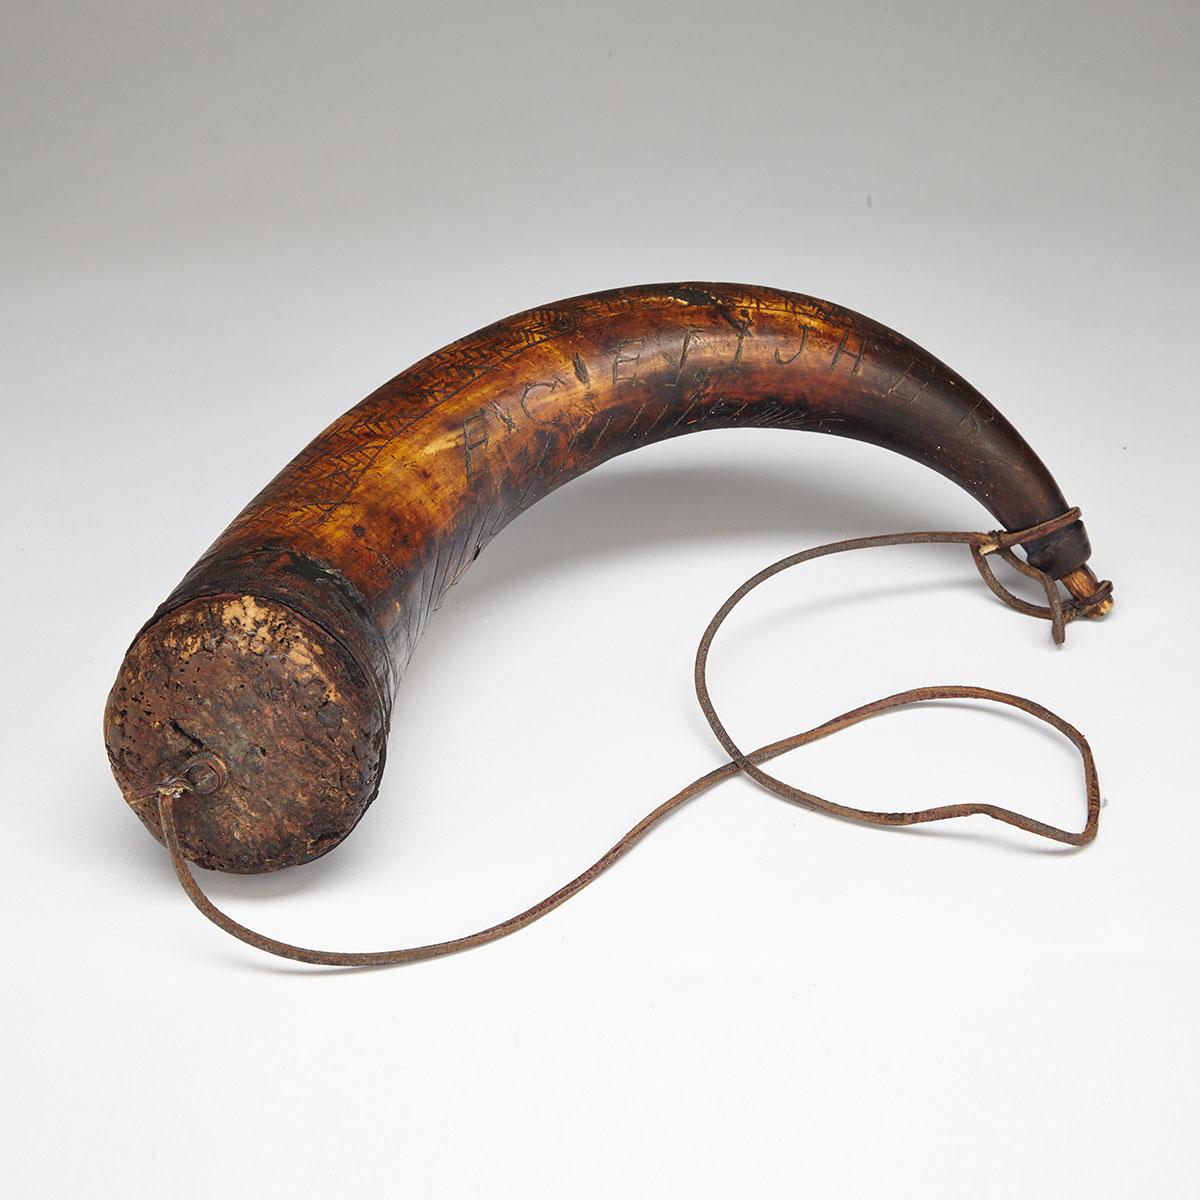 French and Indian War Style Powder Horn, possibly 2nd half, 18th century